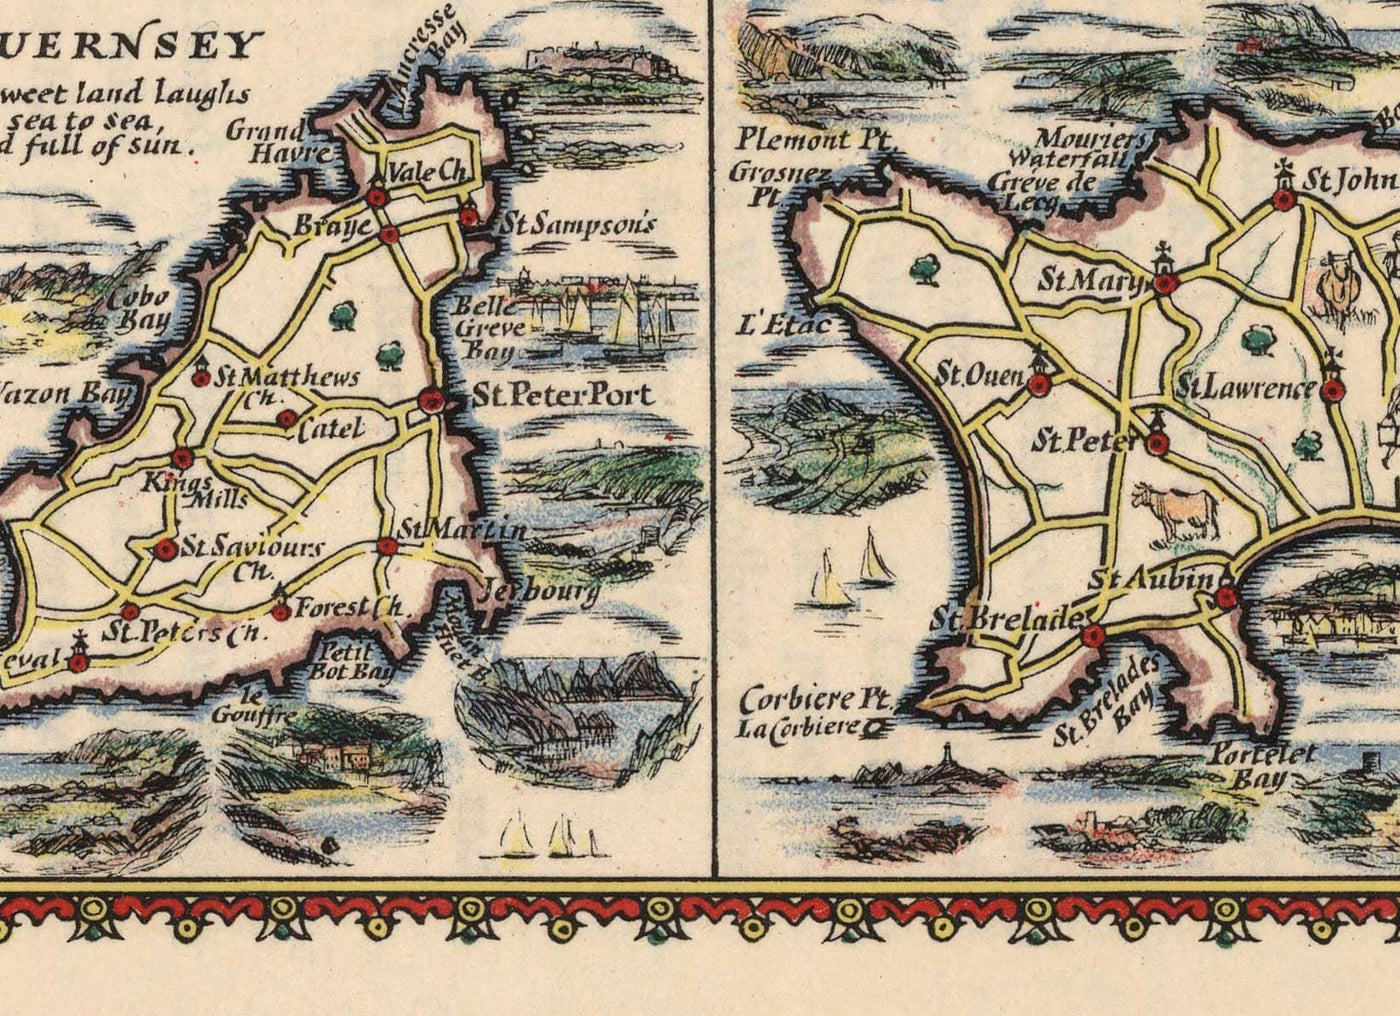 Old Car Map of British Islands - Isle of Wight, Scilly, Man, Jersey, Guernsey